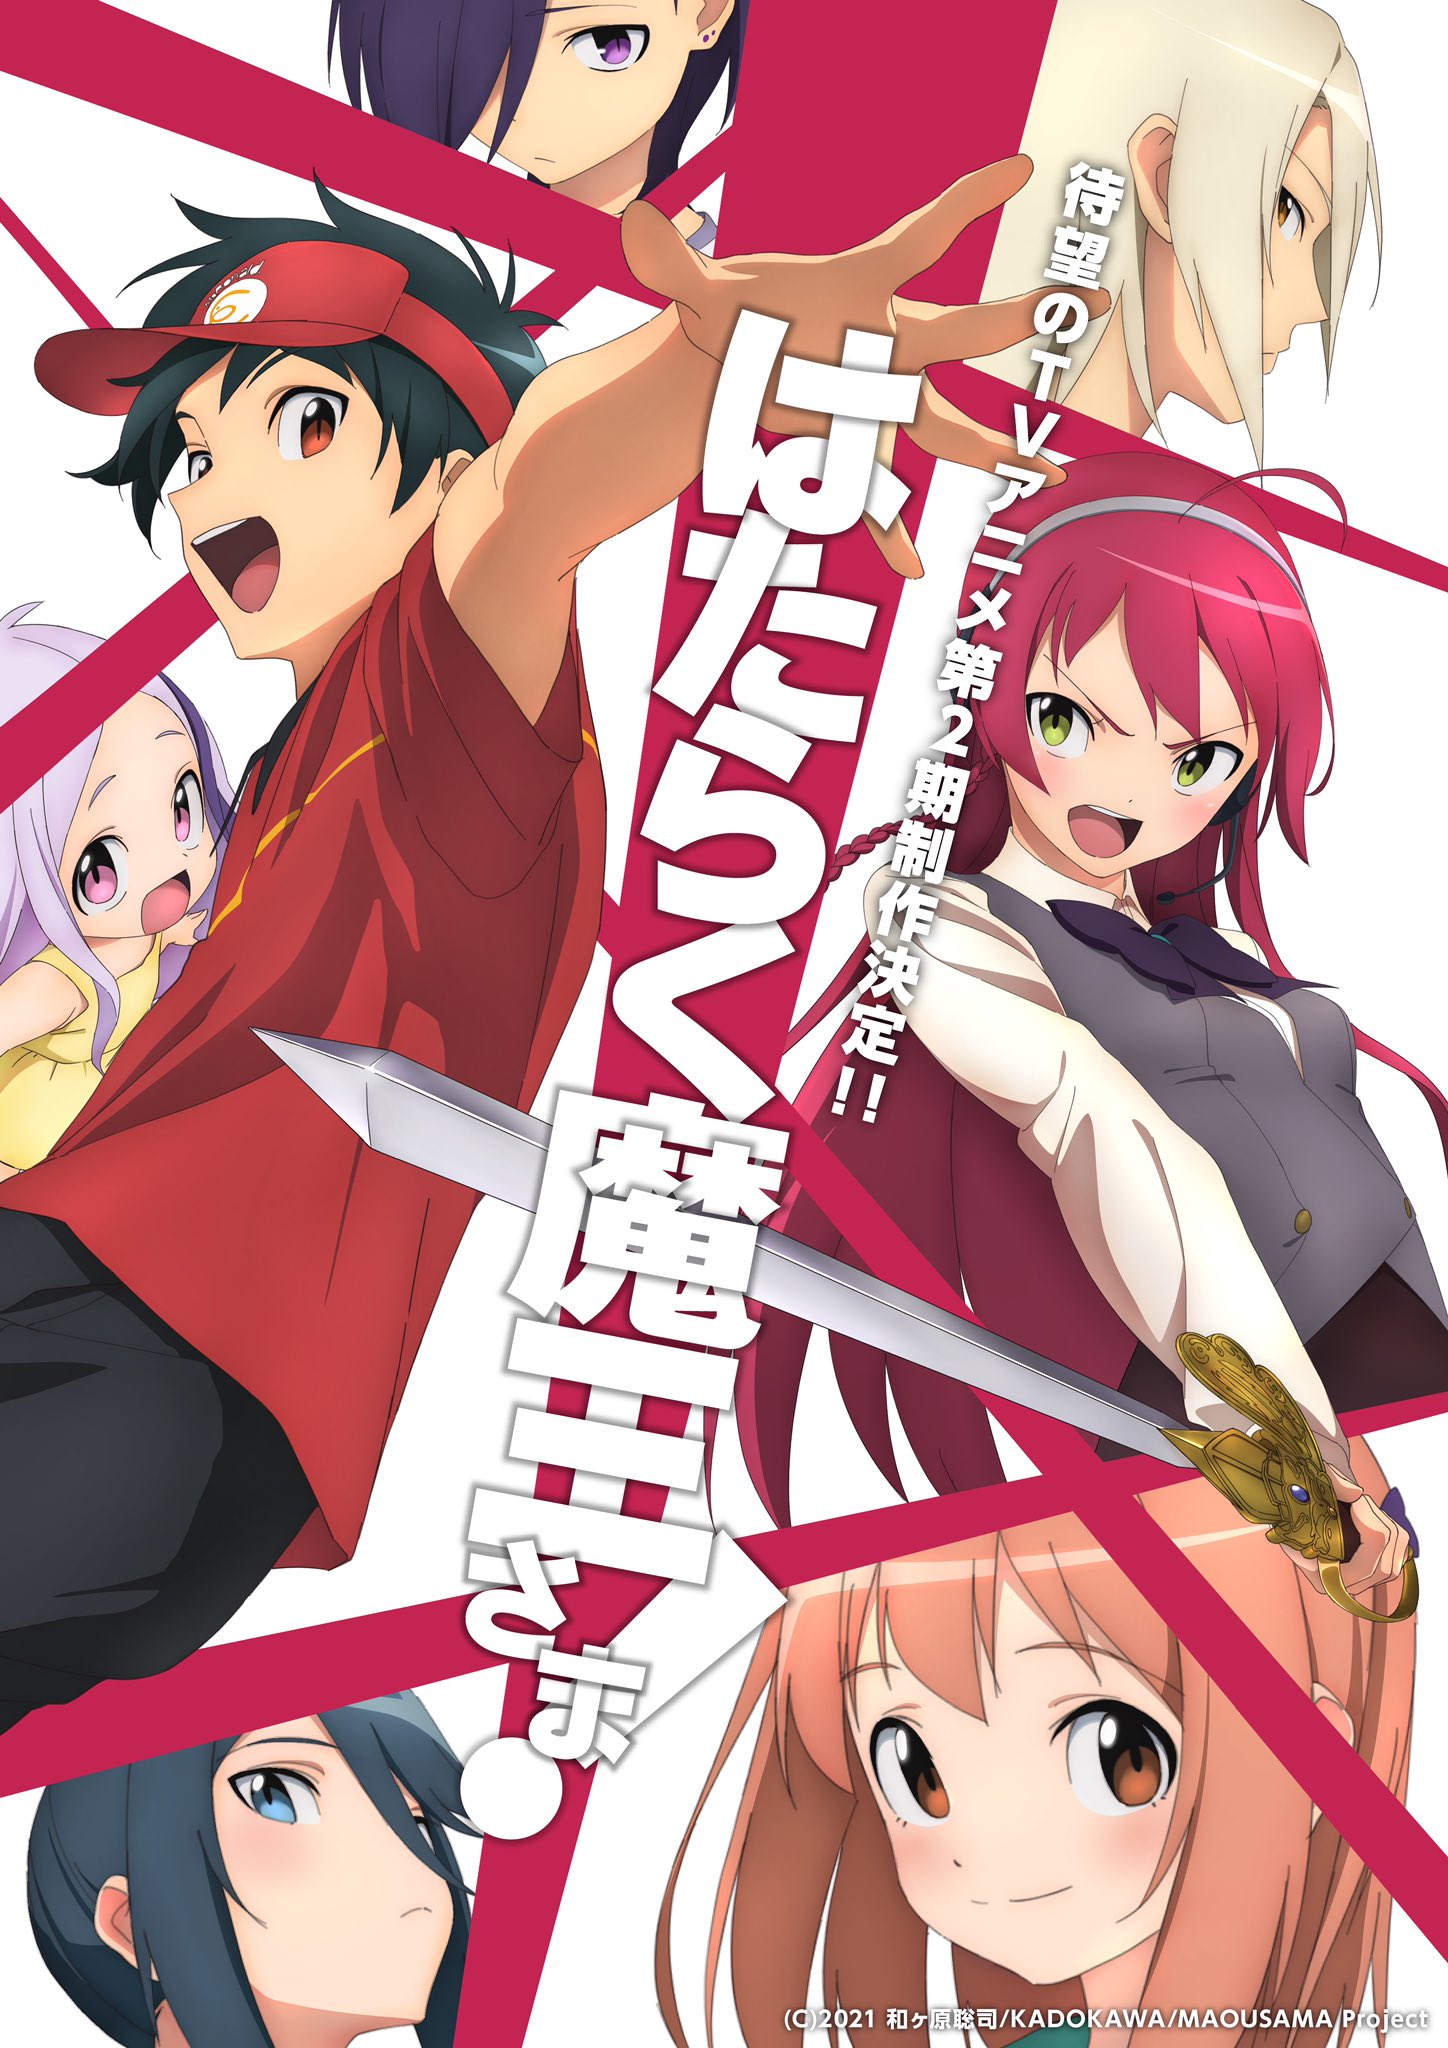 The Devil Is a Part-Timer! Author Satoshi Wagahara Launches New